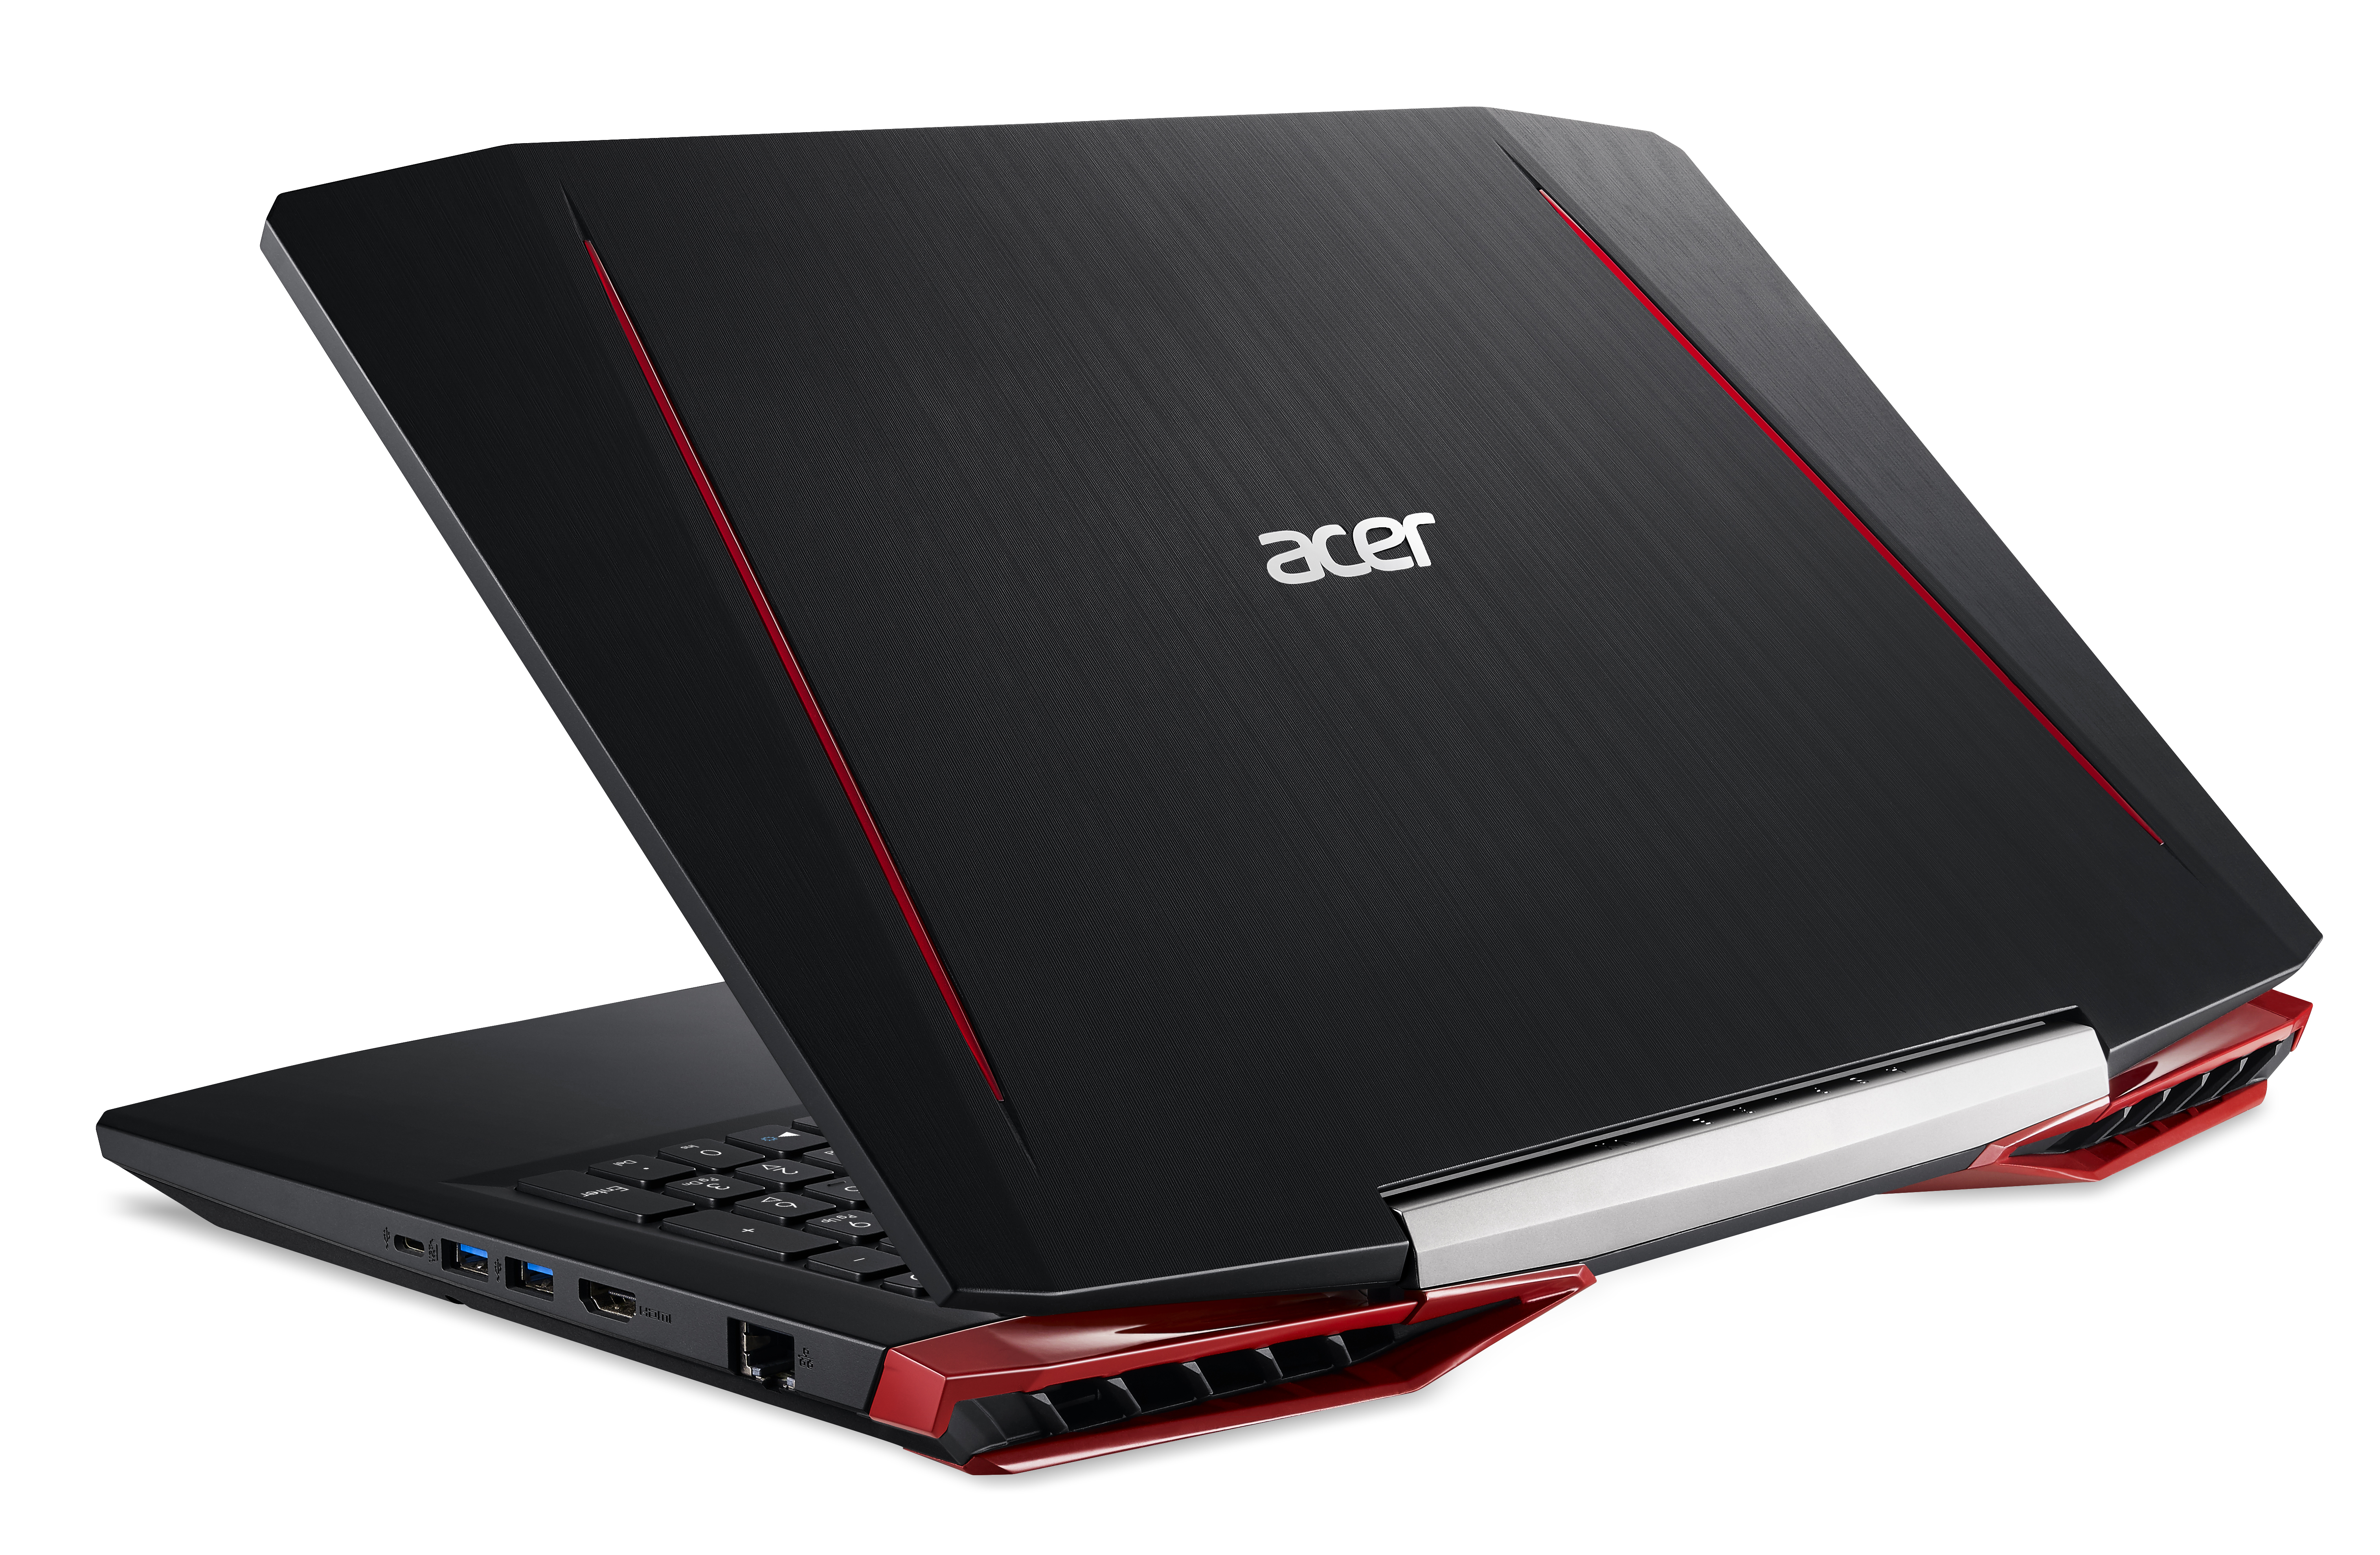 The Acer Aspire VX powered by Windows 10